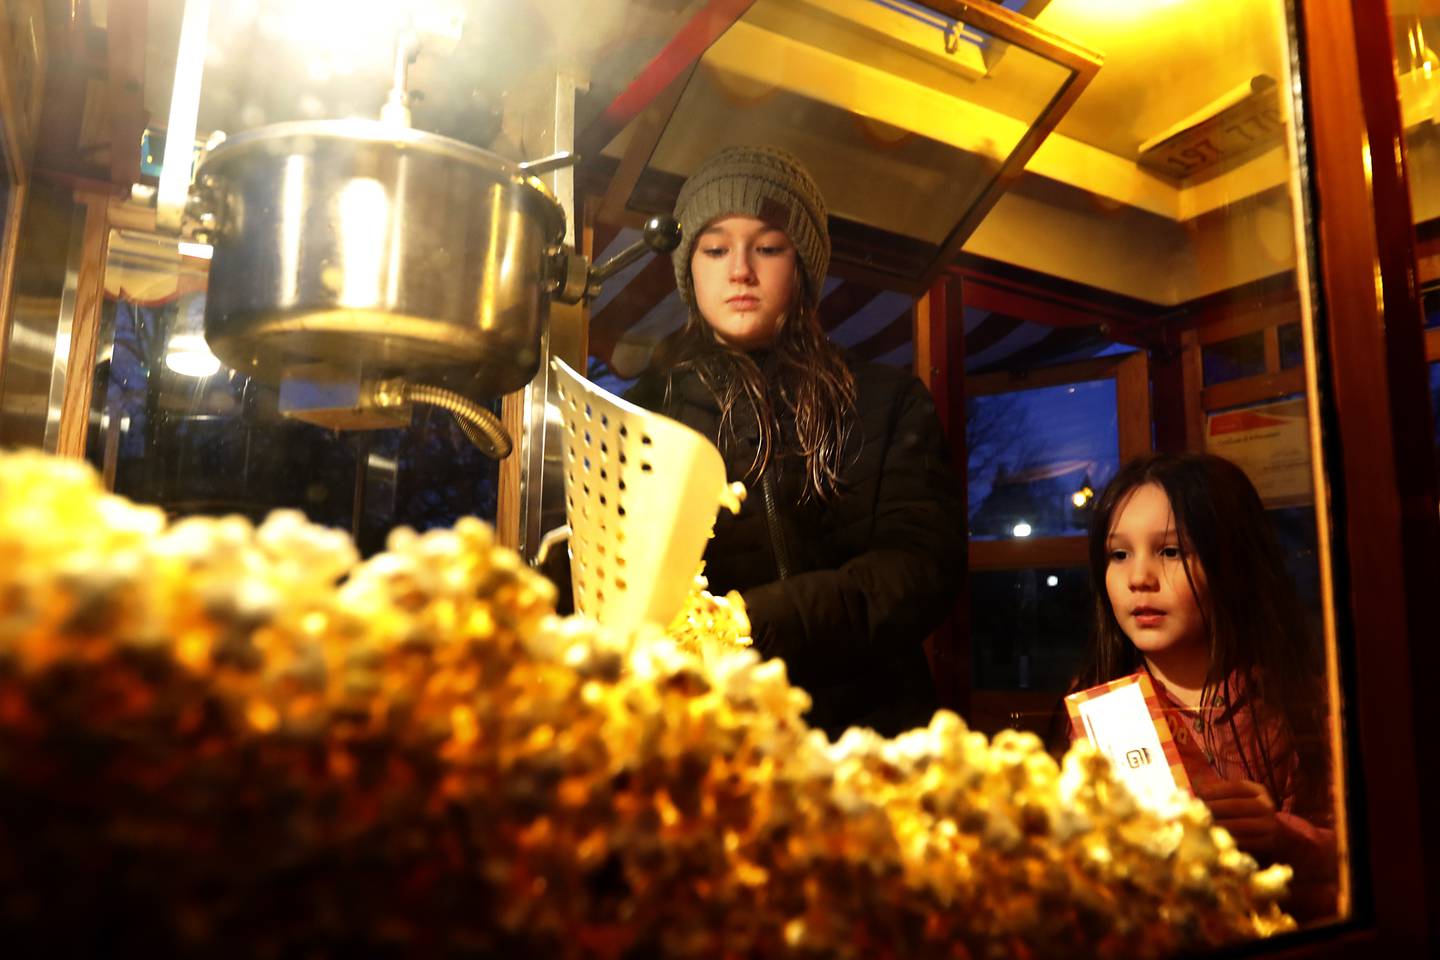 Reese Uglinica, 10, and Avery Gonzalez, 5, get popcorn out of the 1928 Ford Model Popcorn Wagon operated by Reese’s father’s Scott Uglinica on Wednesday, Jan. 18, 2023, at Veterans Memorial Park in McHenry.